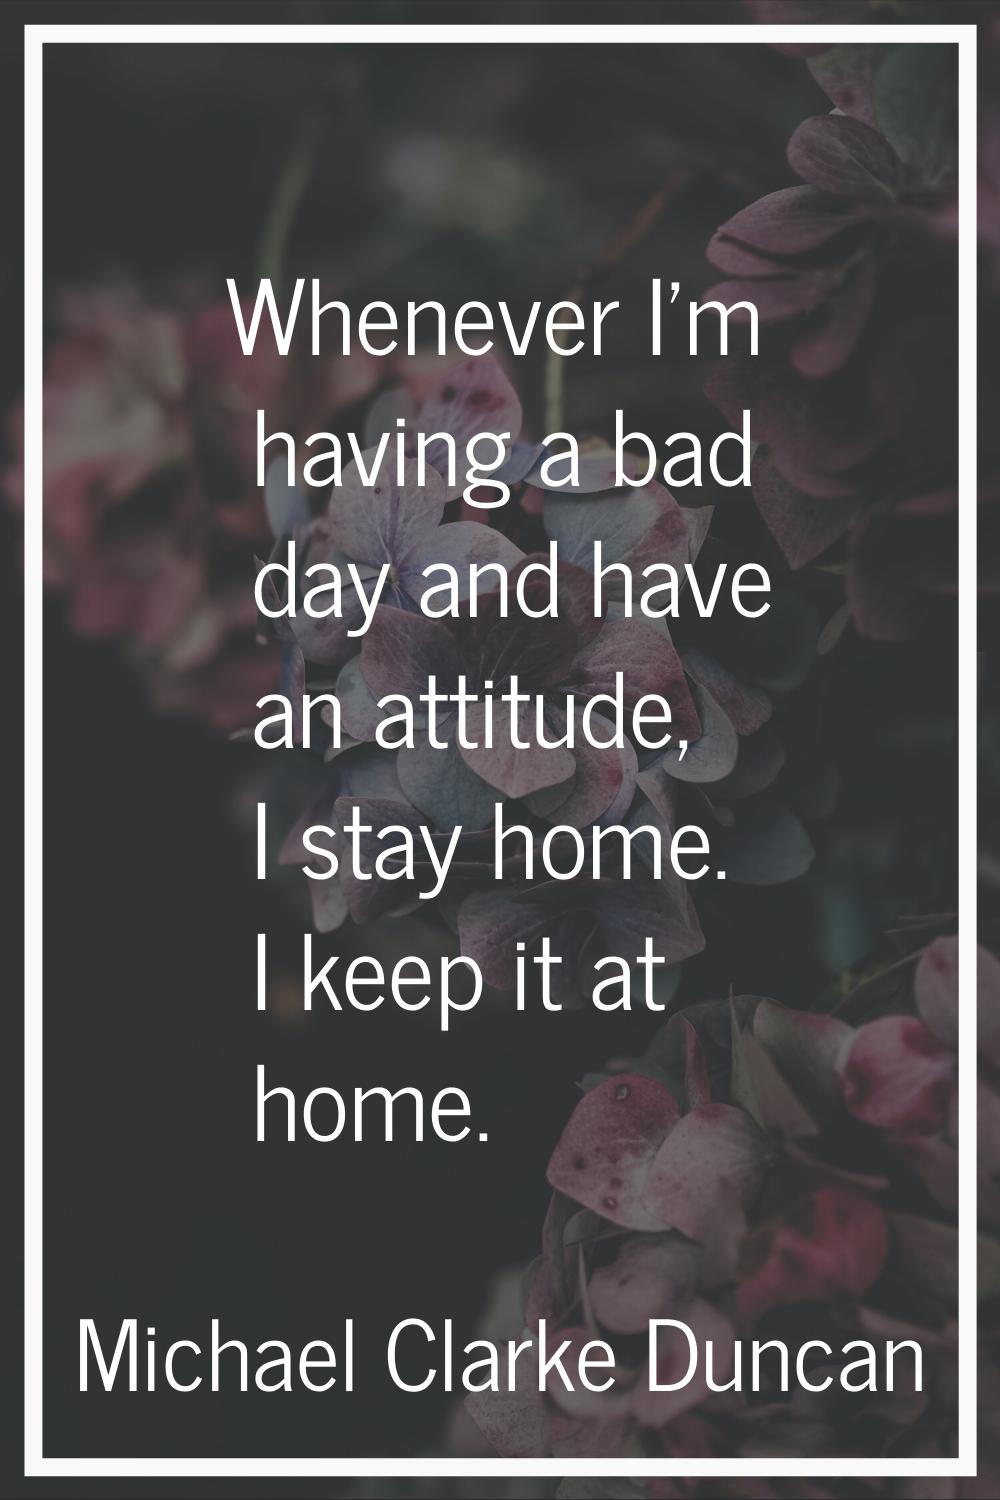 Whenever I'm having a bad day and have an attitude, I stay home. I keep it at home.